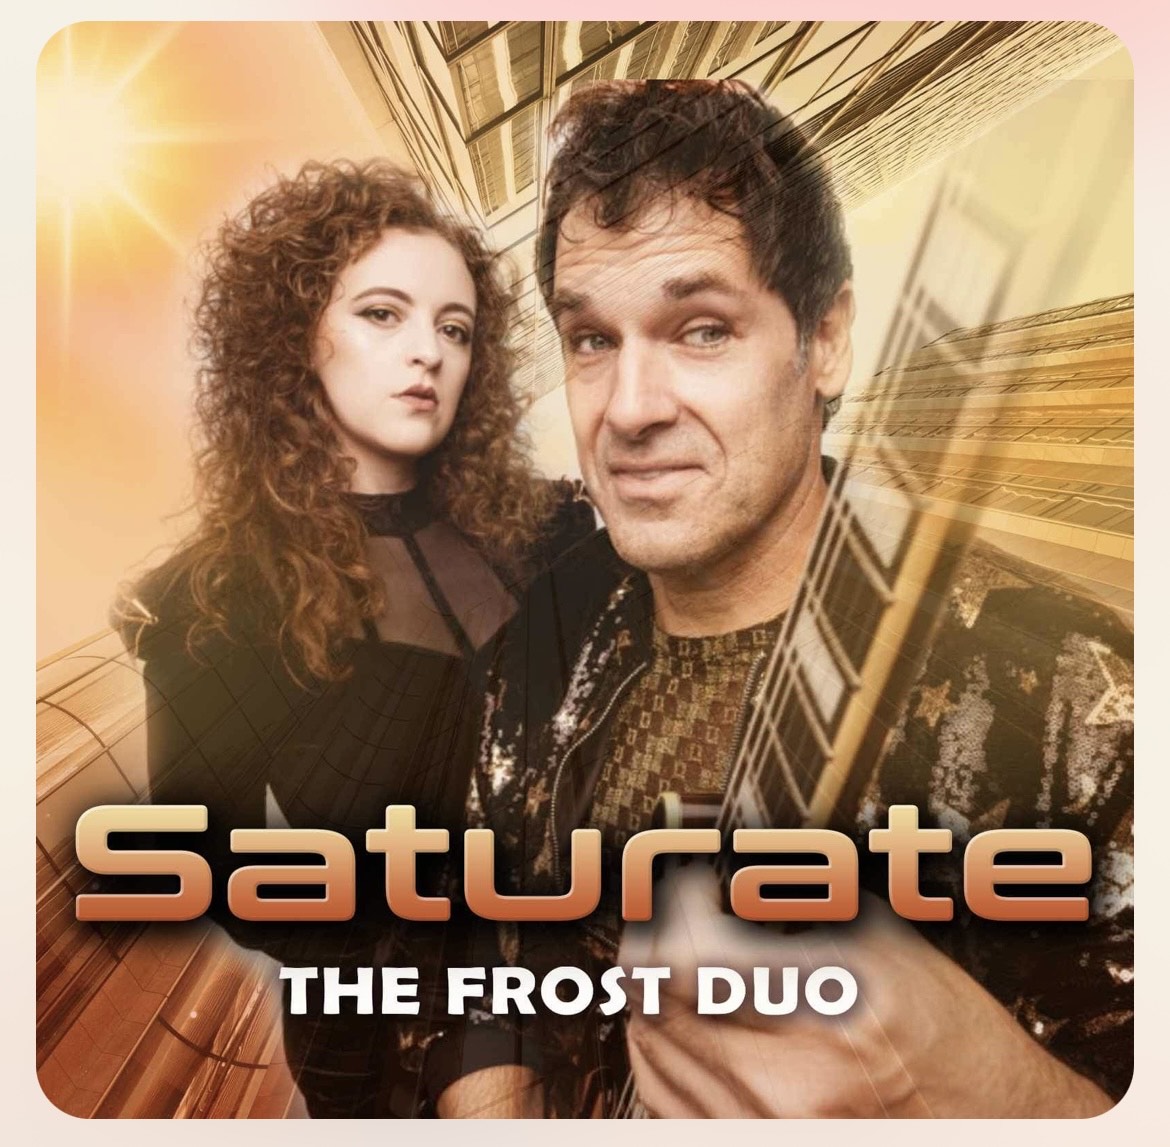 The Frost Duo ‘Saturate’ – LISTEN